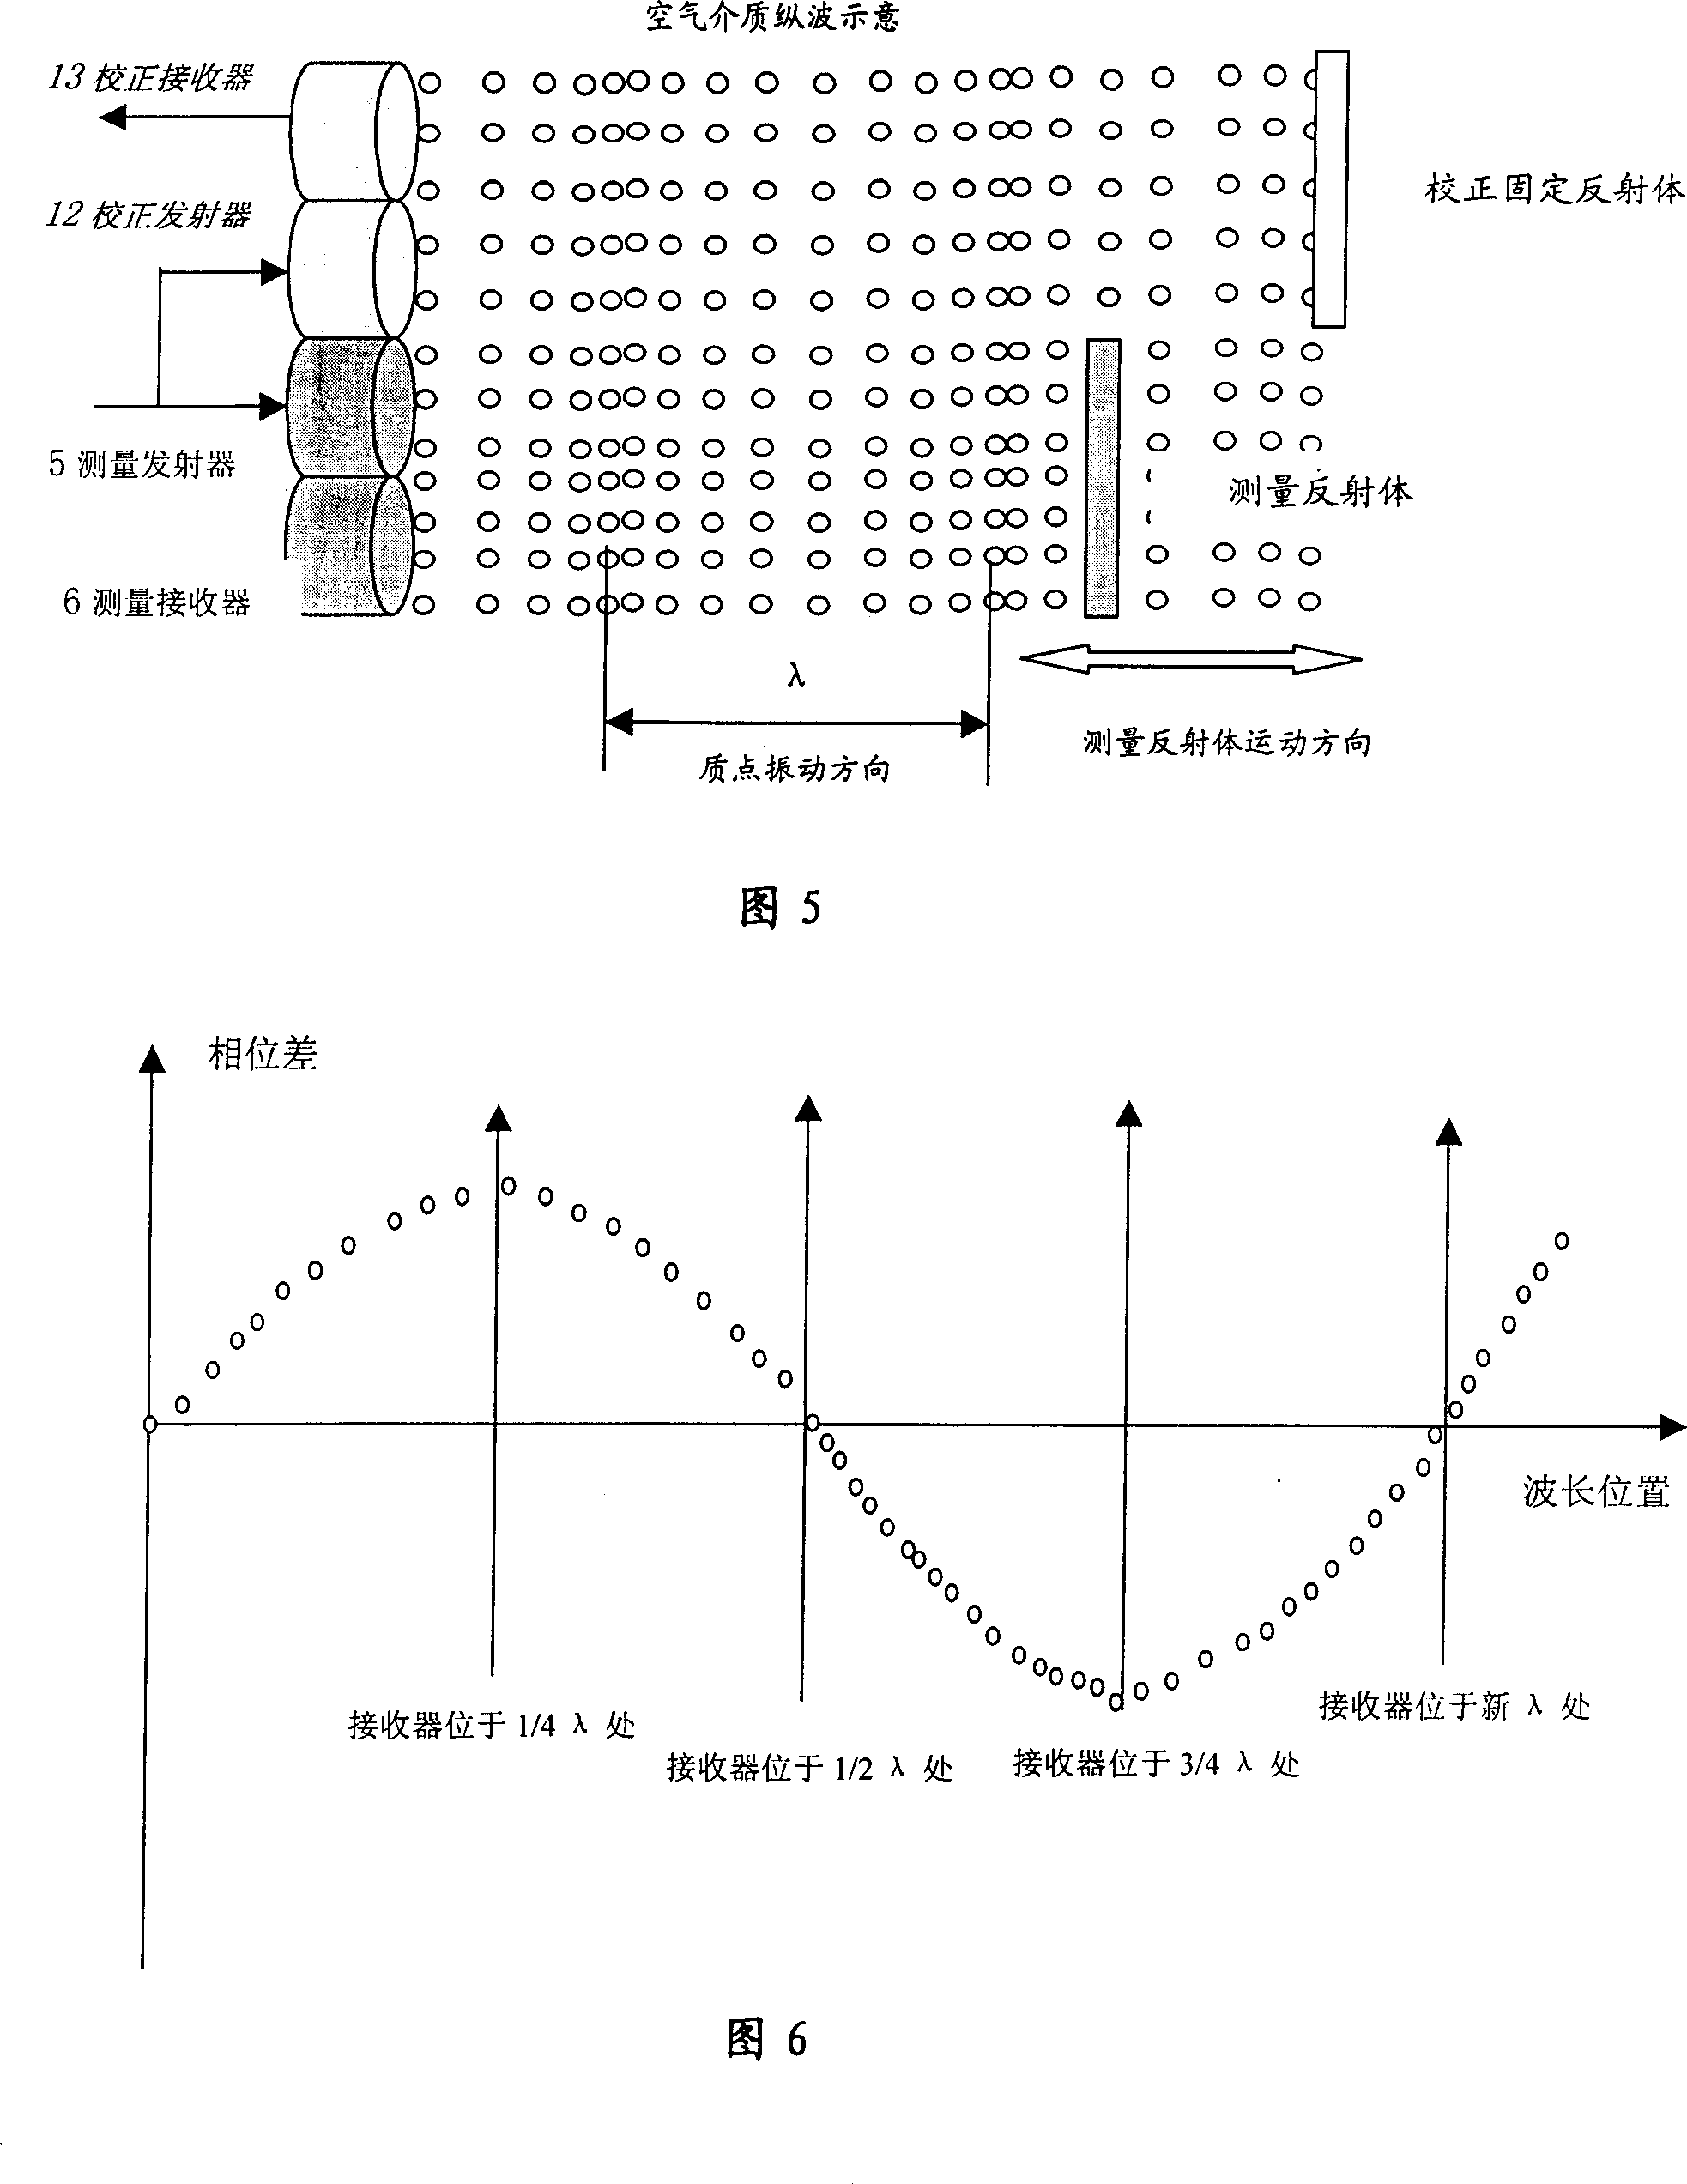 Method and device for measuring displacement/distance based on supersonic wave or sonic continuous sound-field phase-demodulating principle